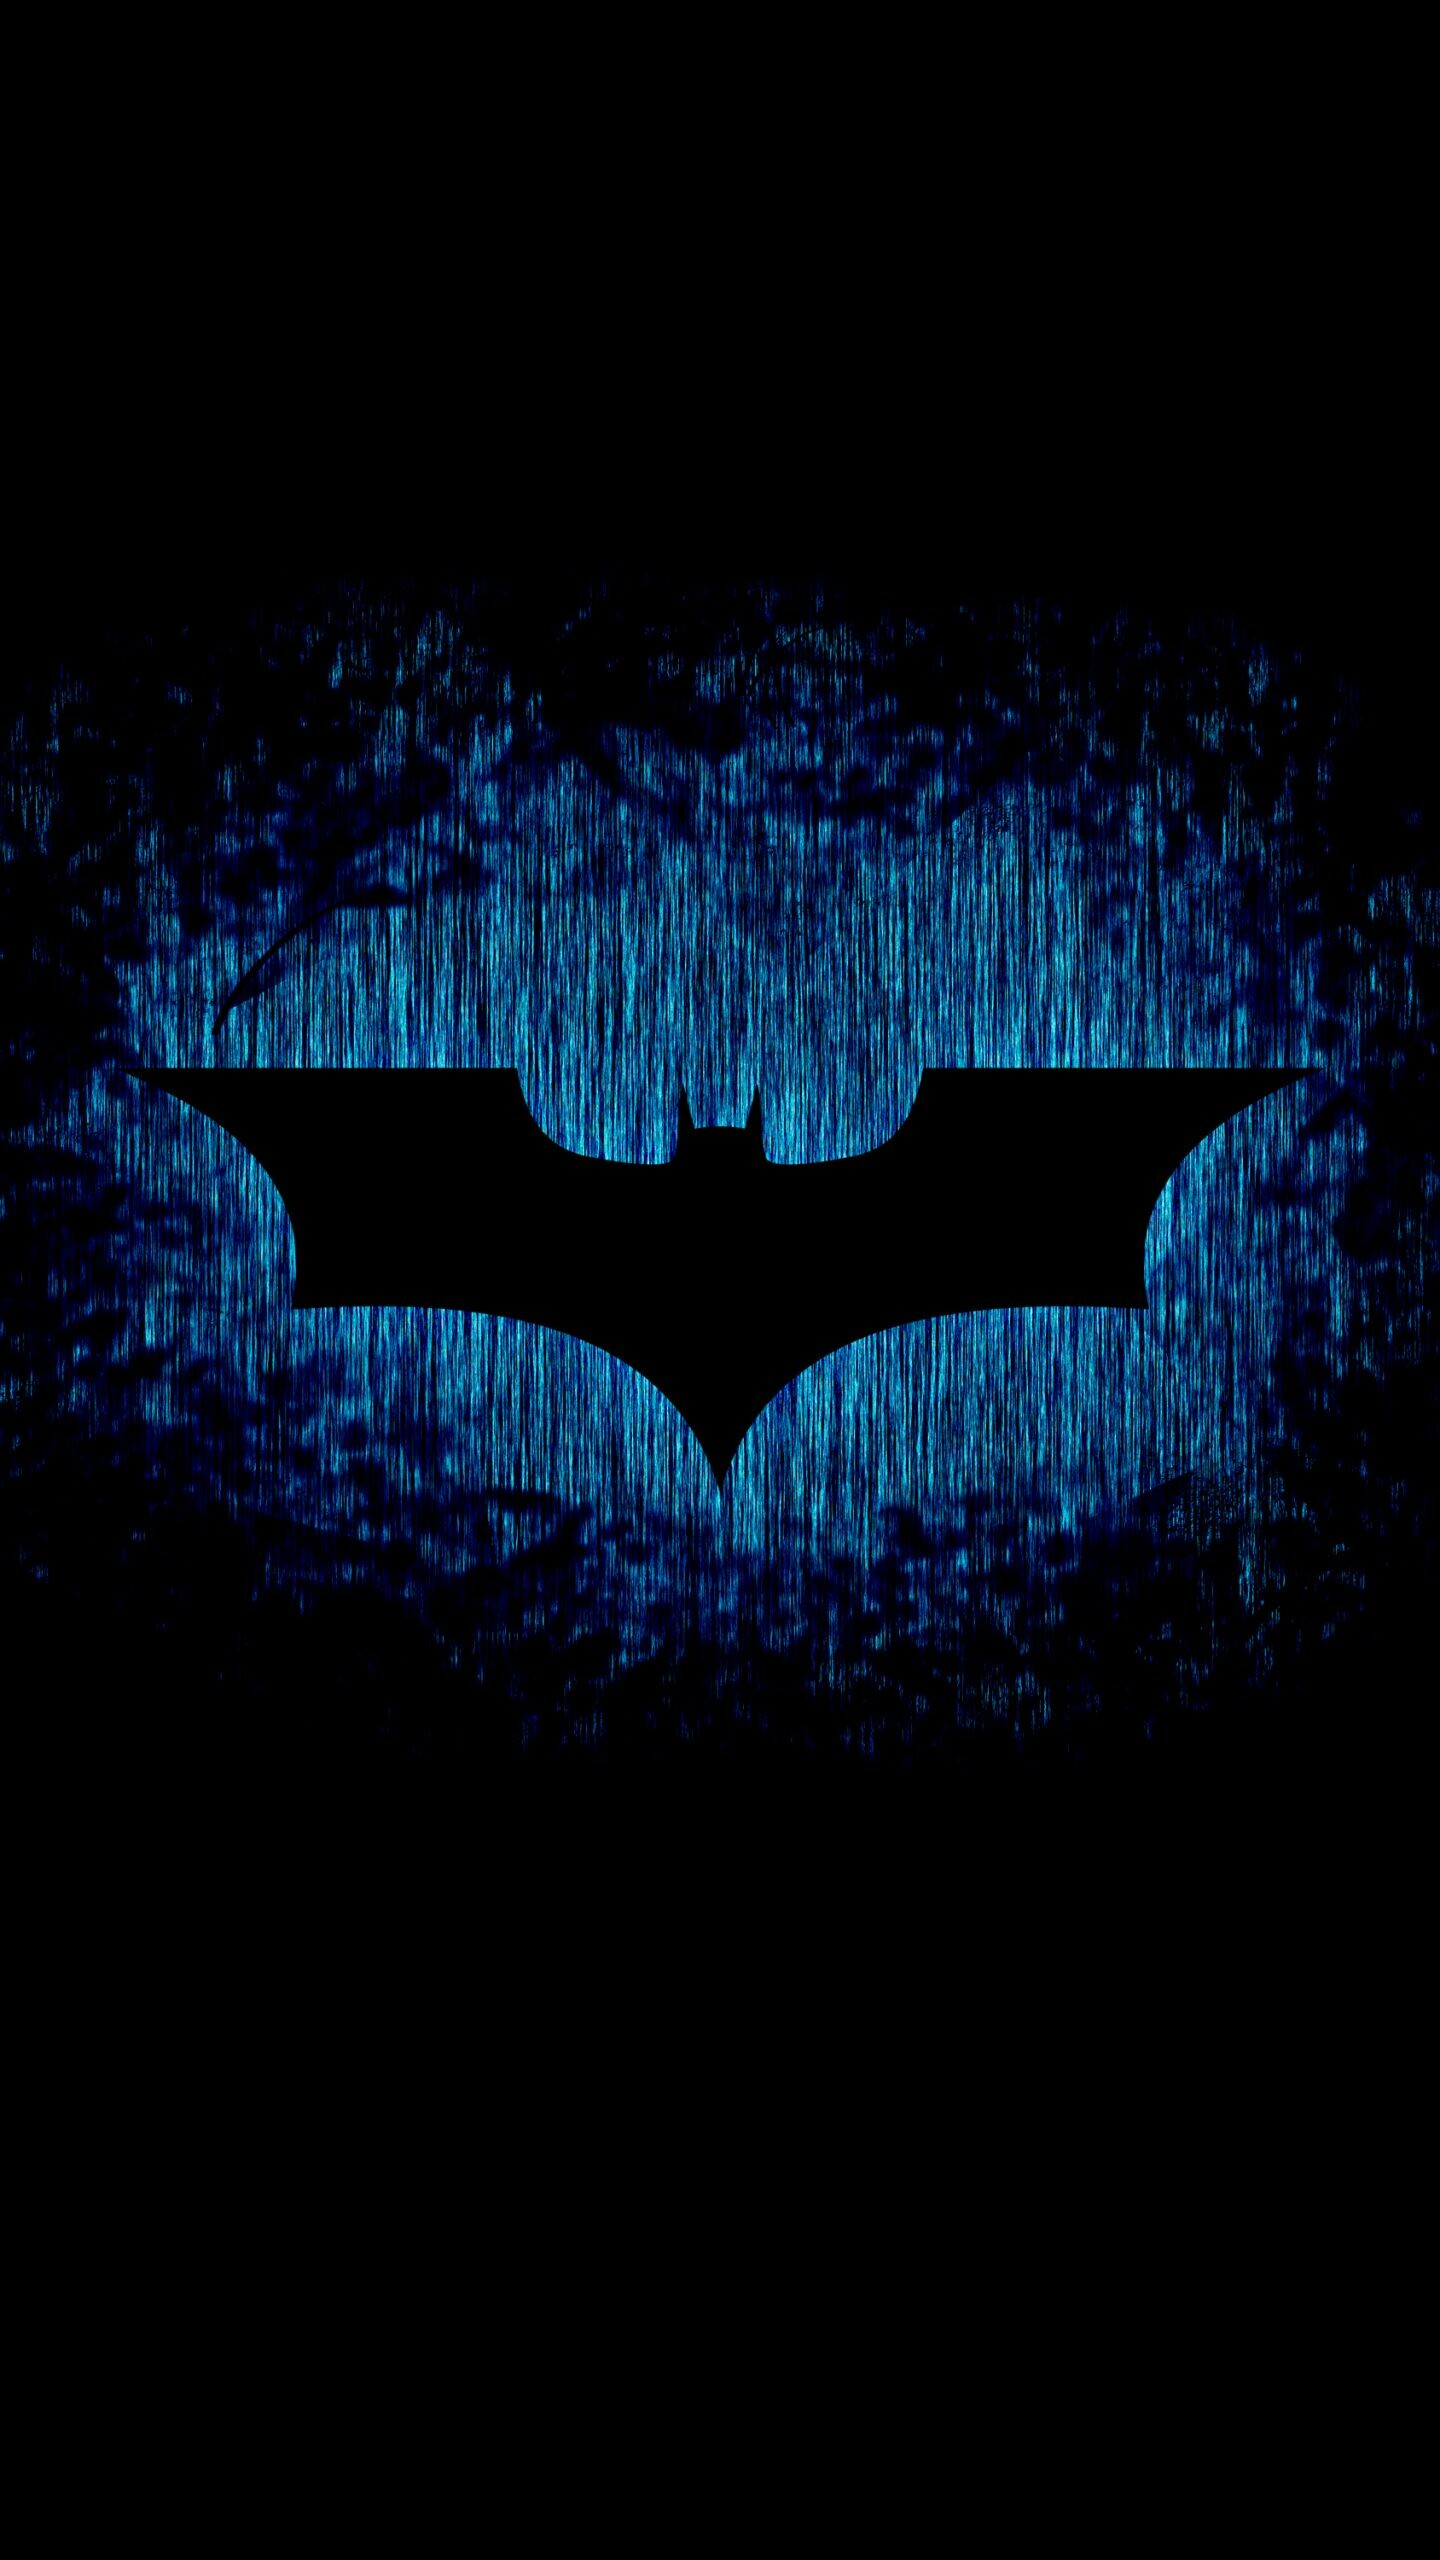 Batman Wallpaper: HD, 4K, 5K for PC and Mobile. Download free image for iPhone, Android